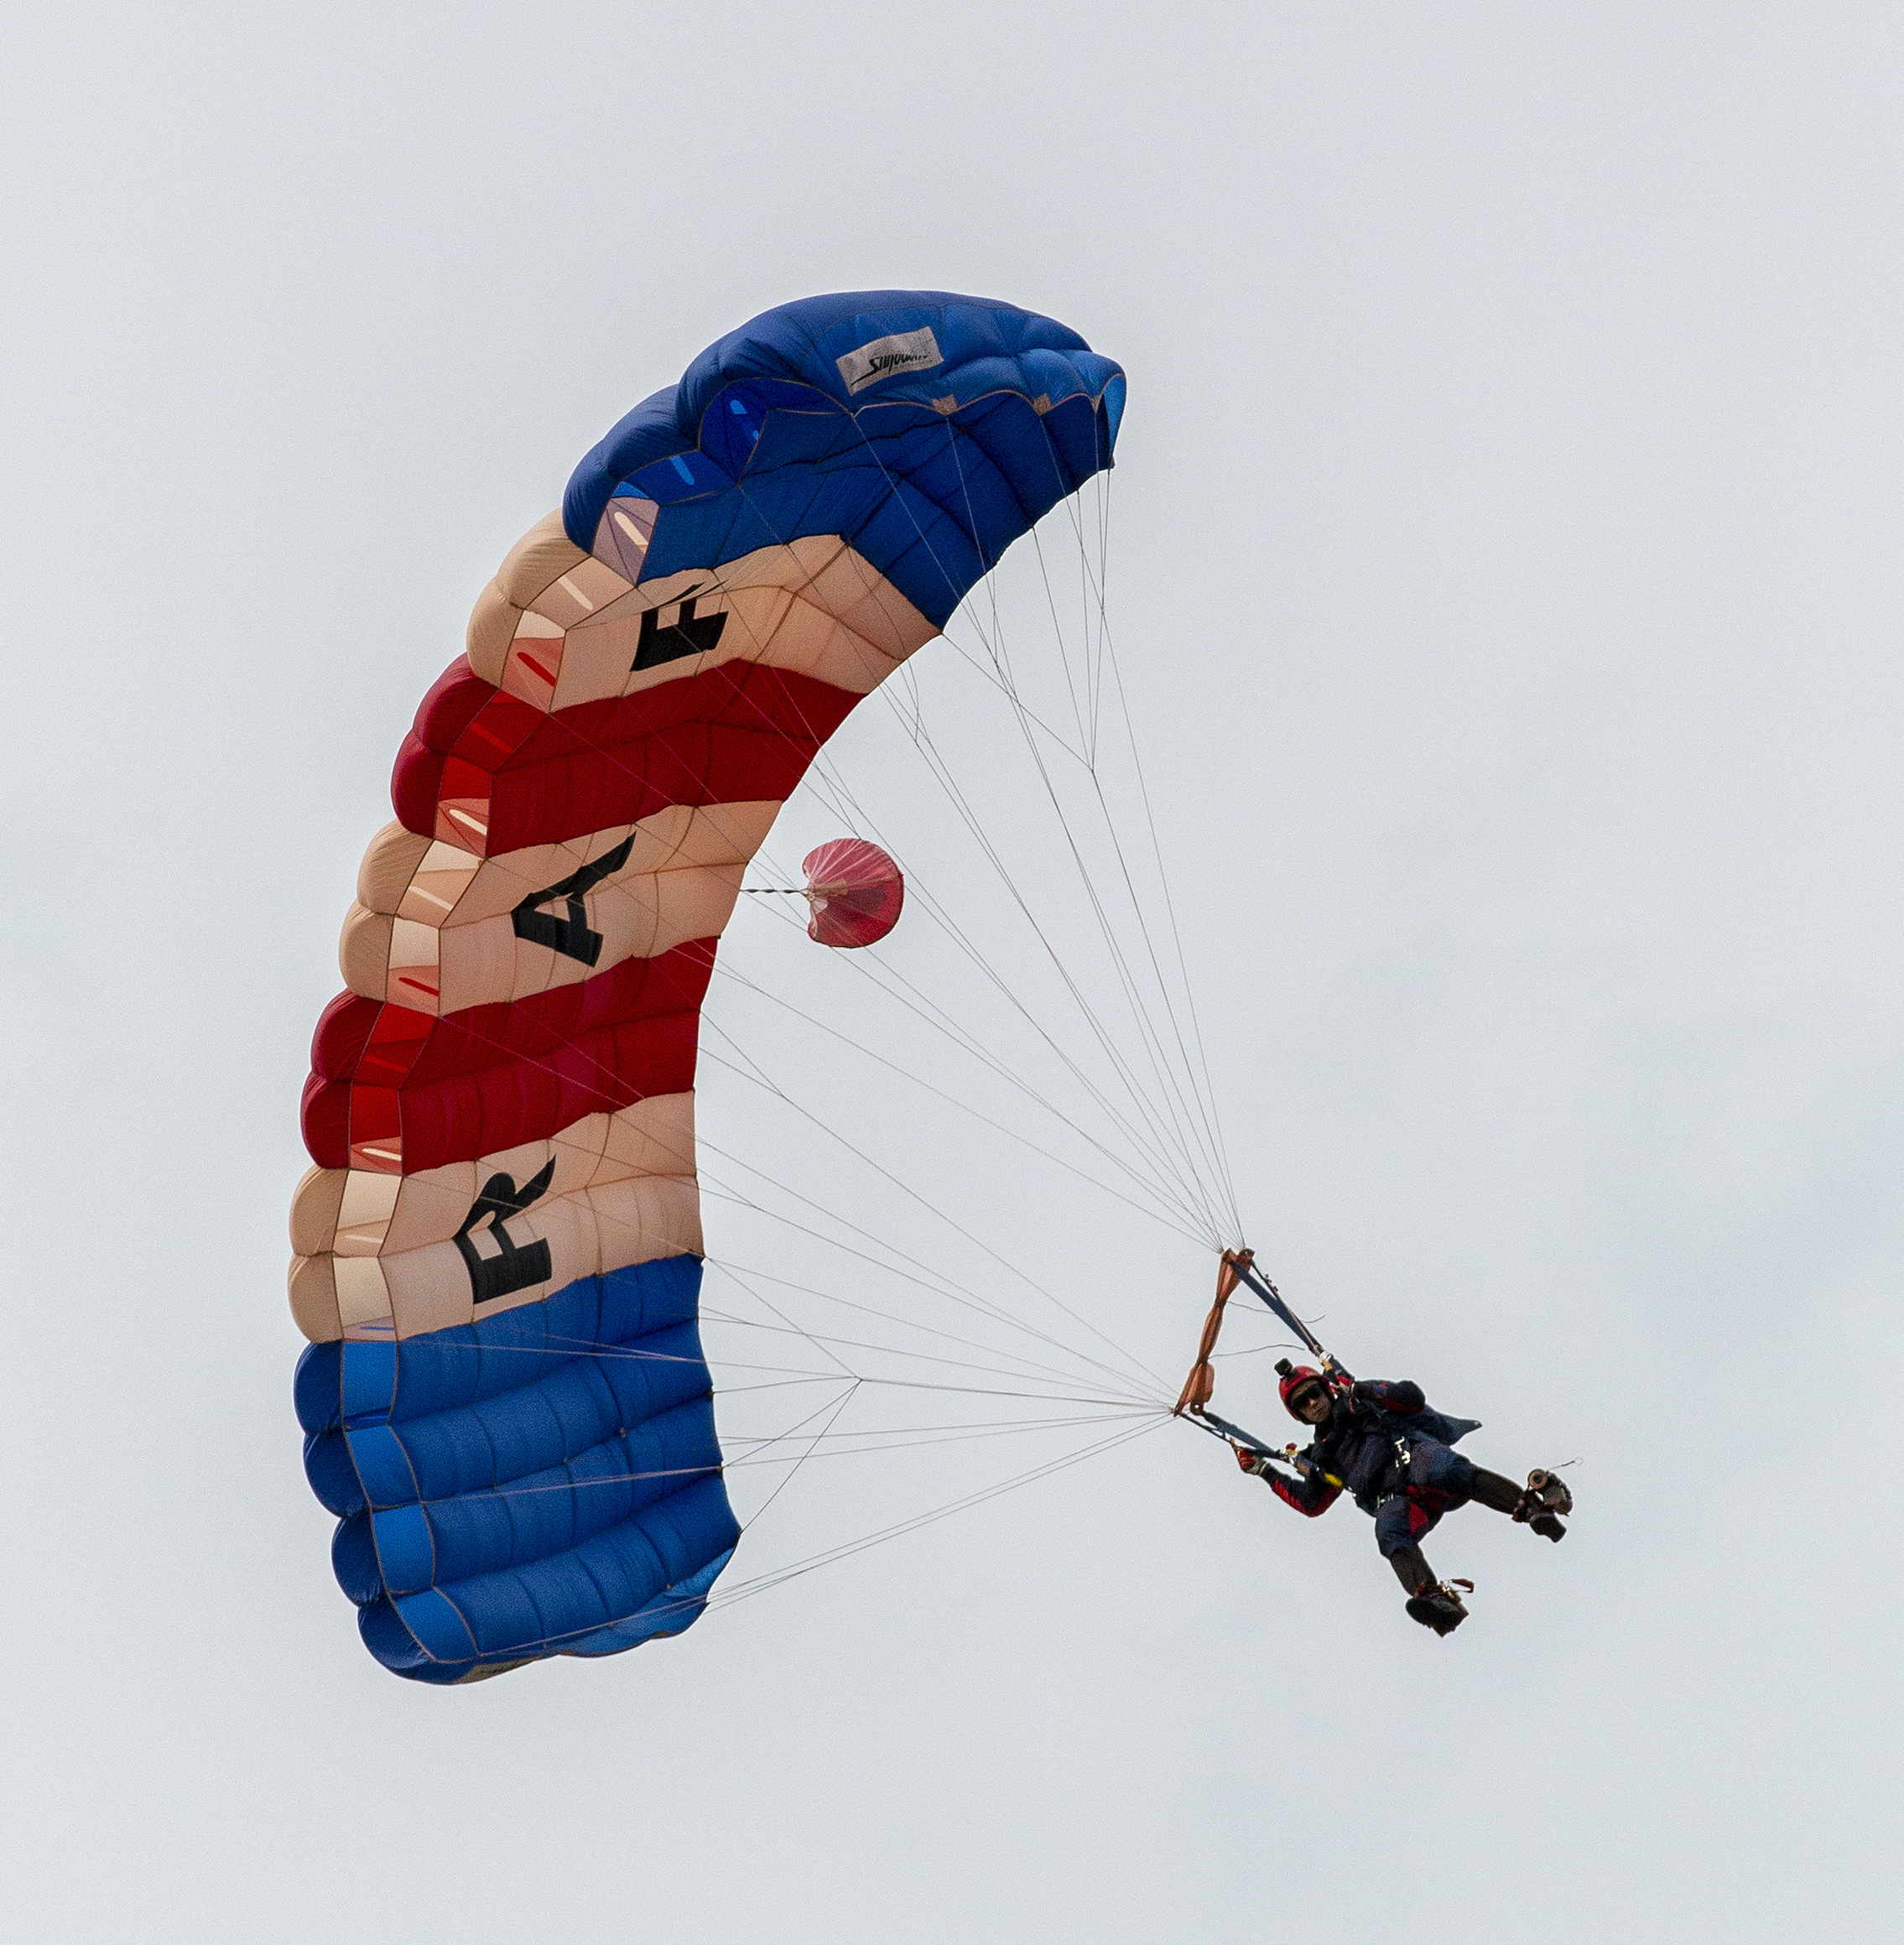 Image shows RAF Falcon performing with deployed parachute.